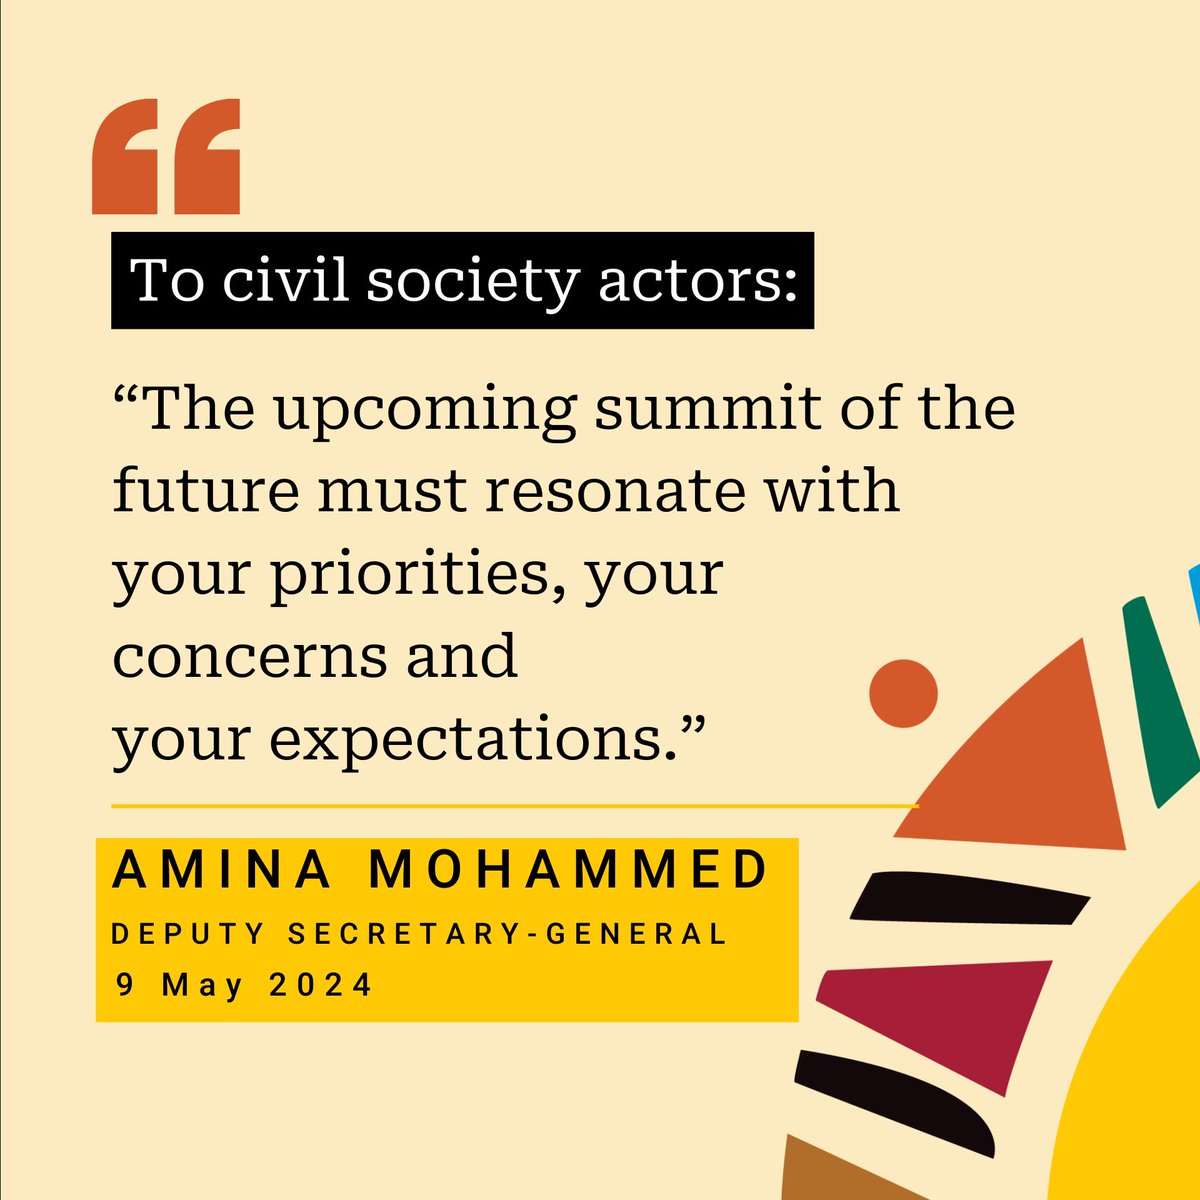 The 69th @UN Civil Society Conference is #HappeningNow in Nairobi, Kenya, for the first time ever in Africa. 70% of the registered organizations are from Africa & 40% are youth-led. We reiterate calls urging civil society to raise their voices ahead of the Summit of the Future.